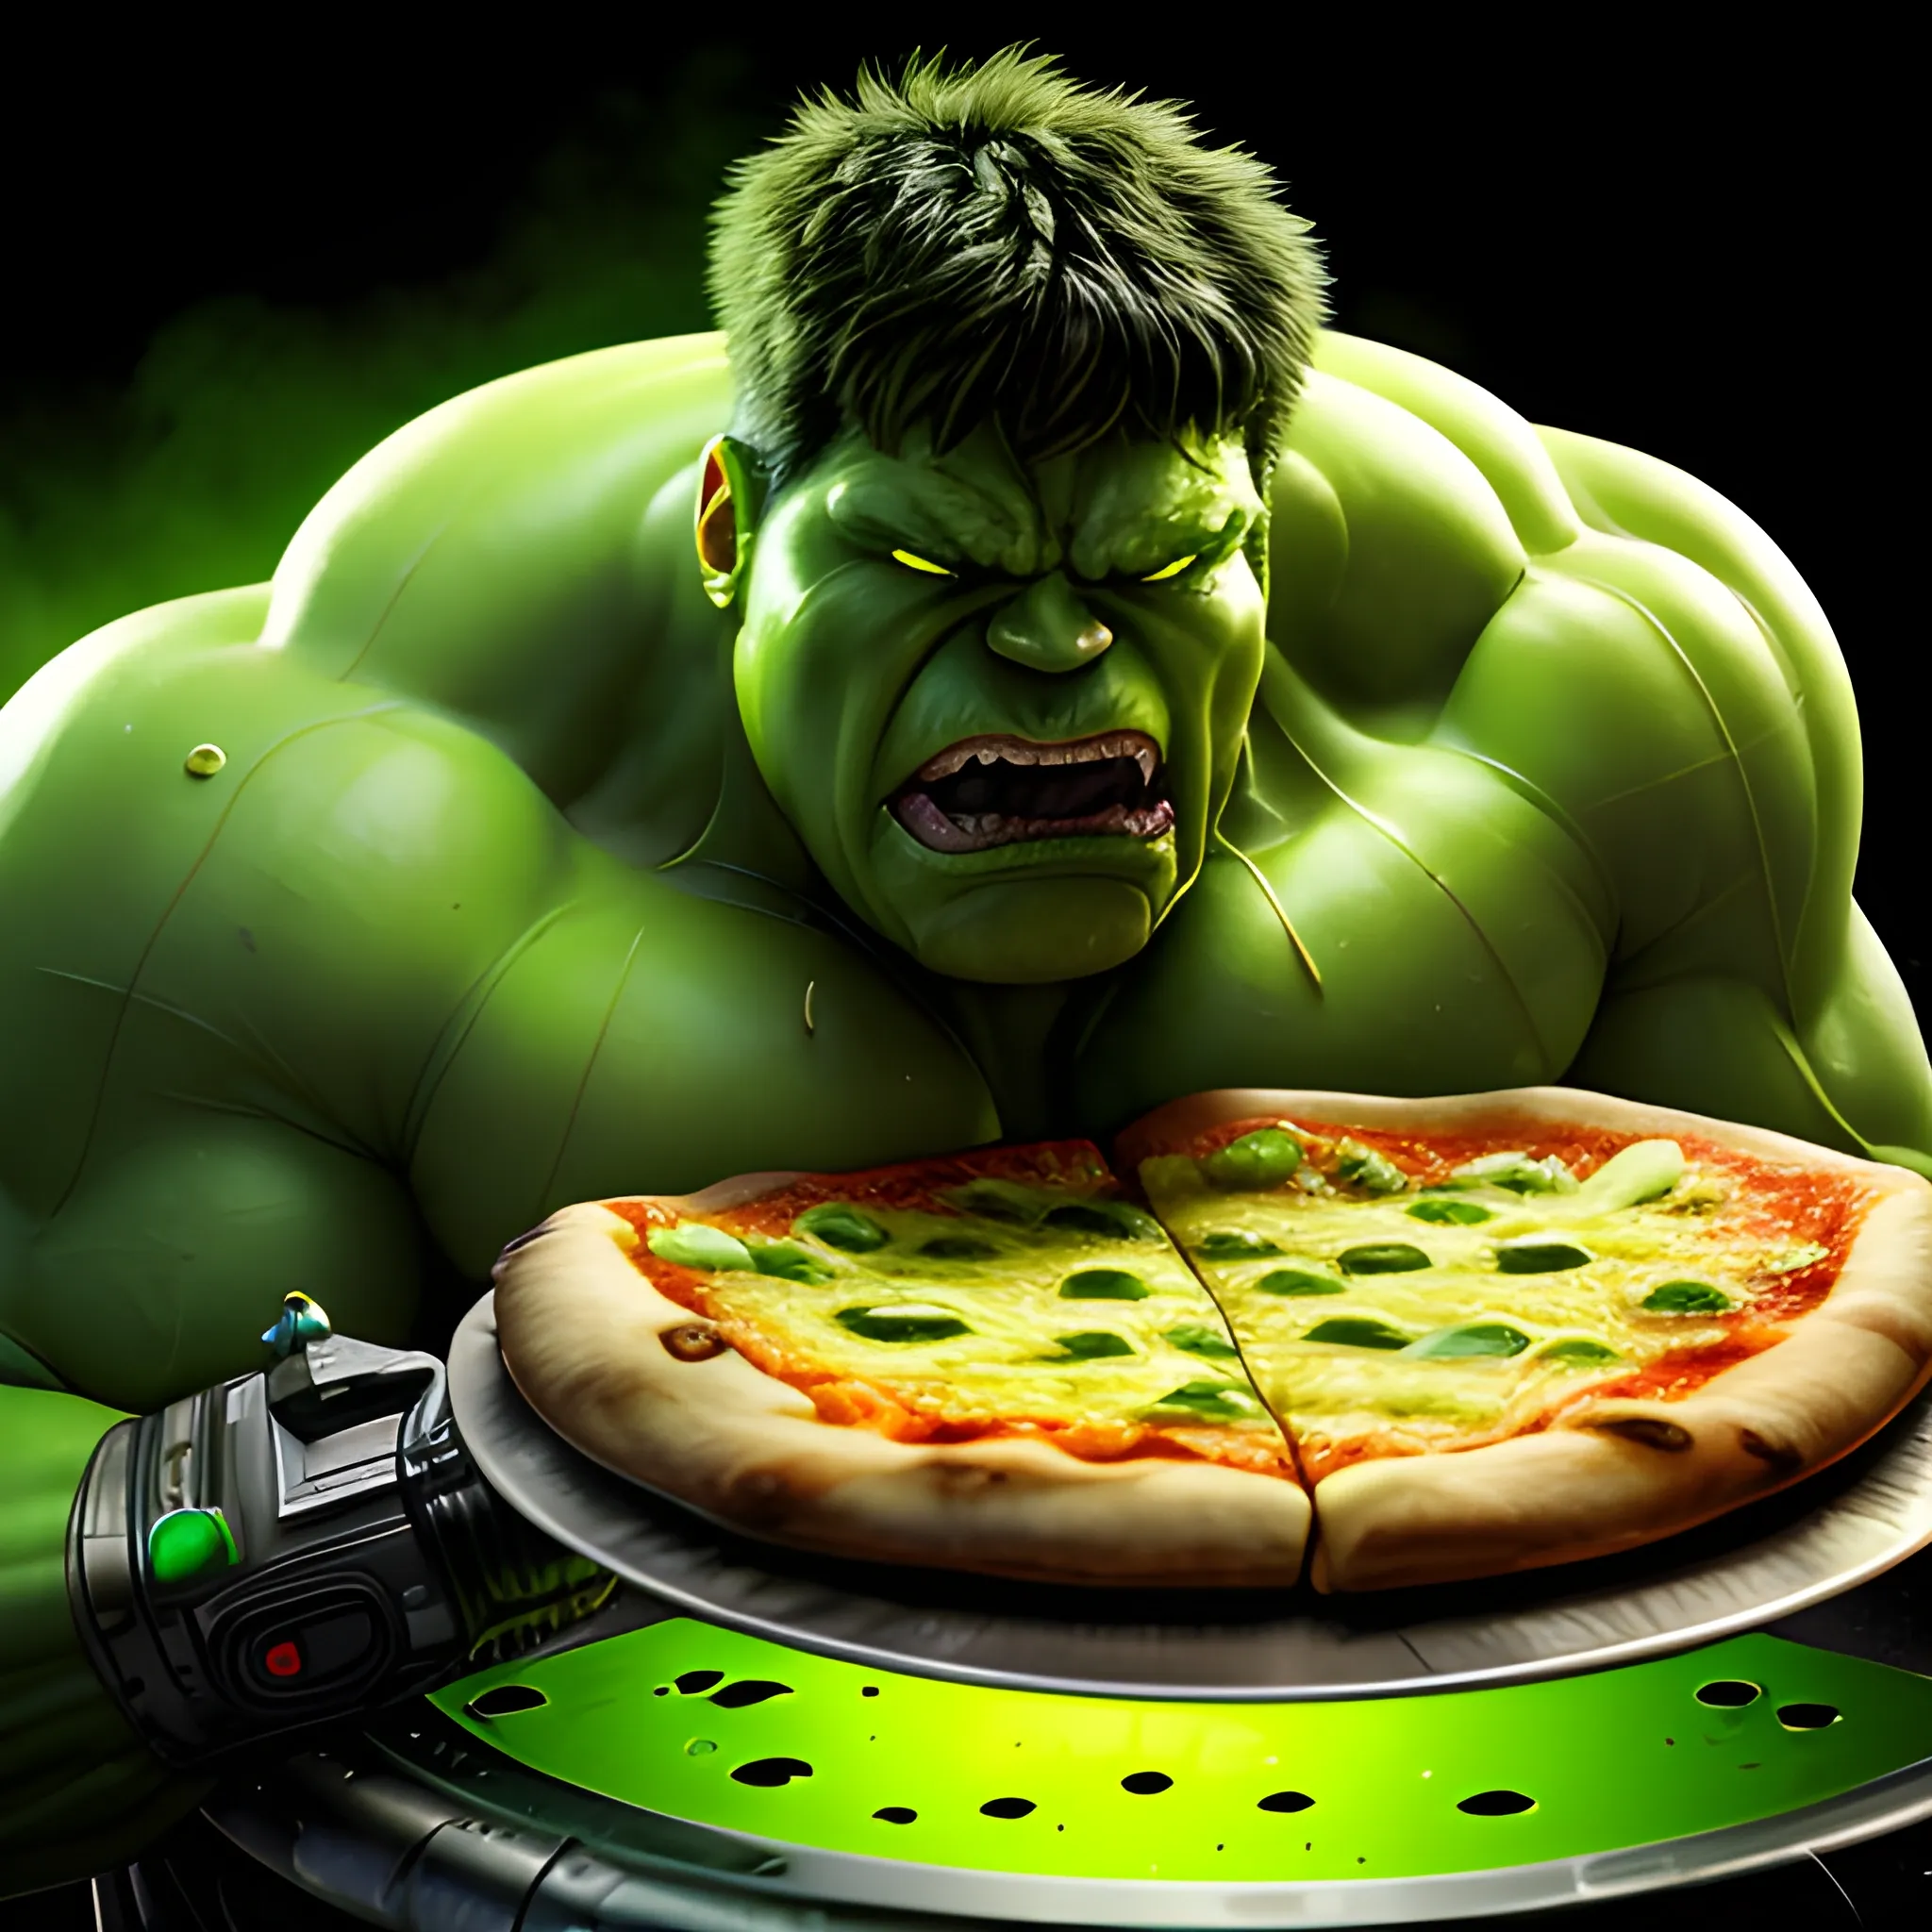 hyper-realistic, 4k image, green Hulk with cybernetic enhancement, biting single slice of cheese dripping pizza , soft studio lighting and edge highlights, luxurious cyberpunk background.